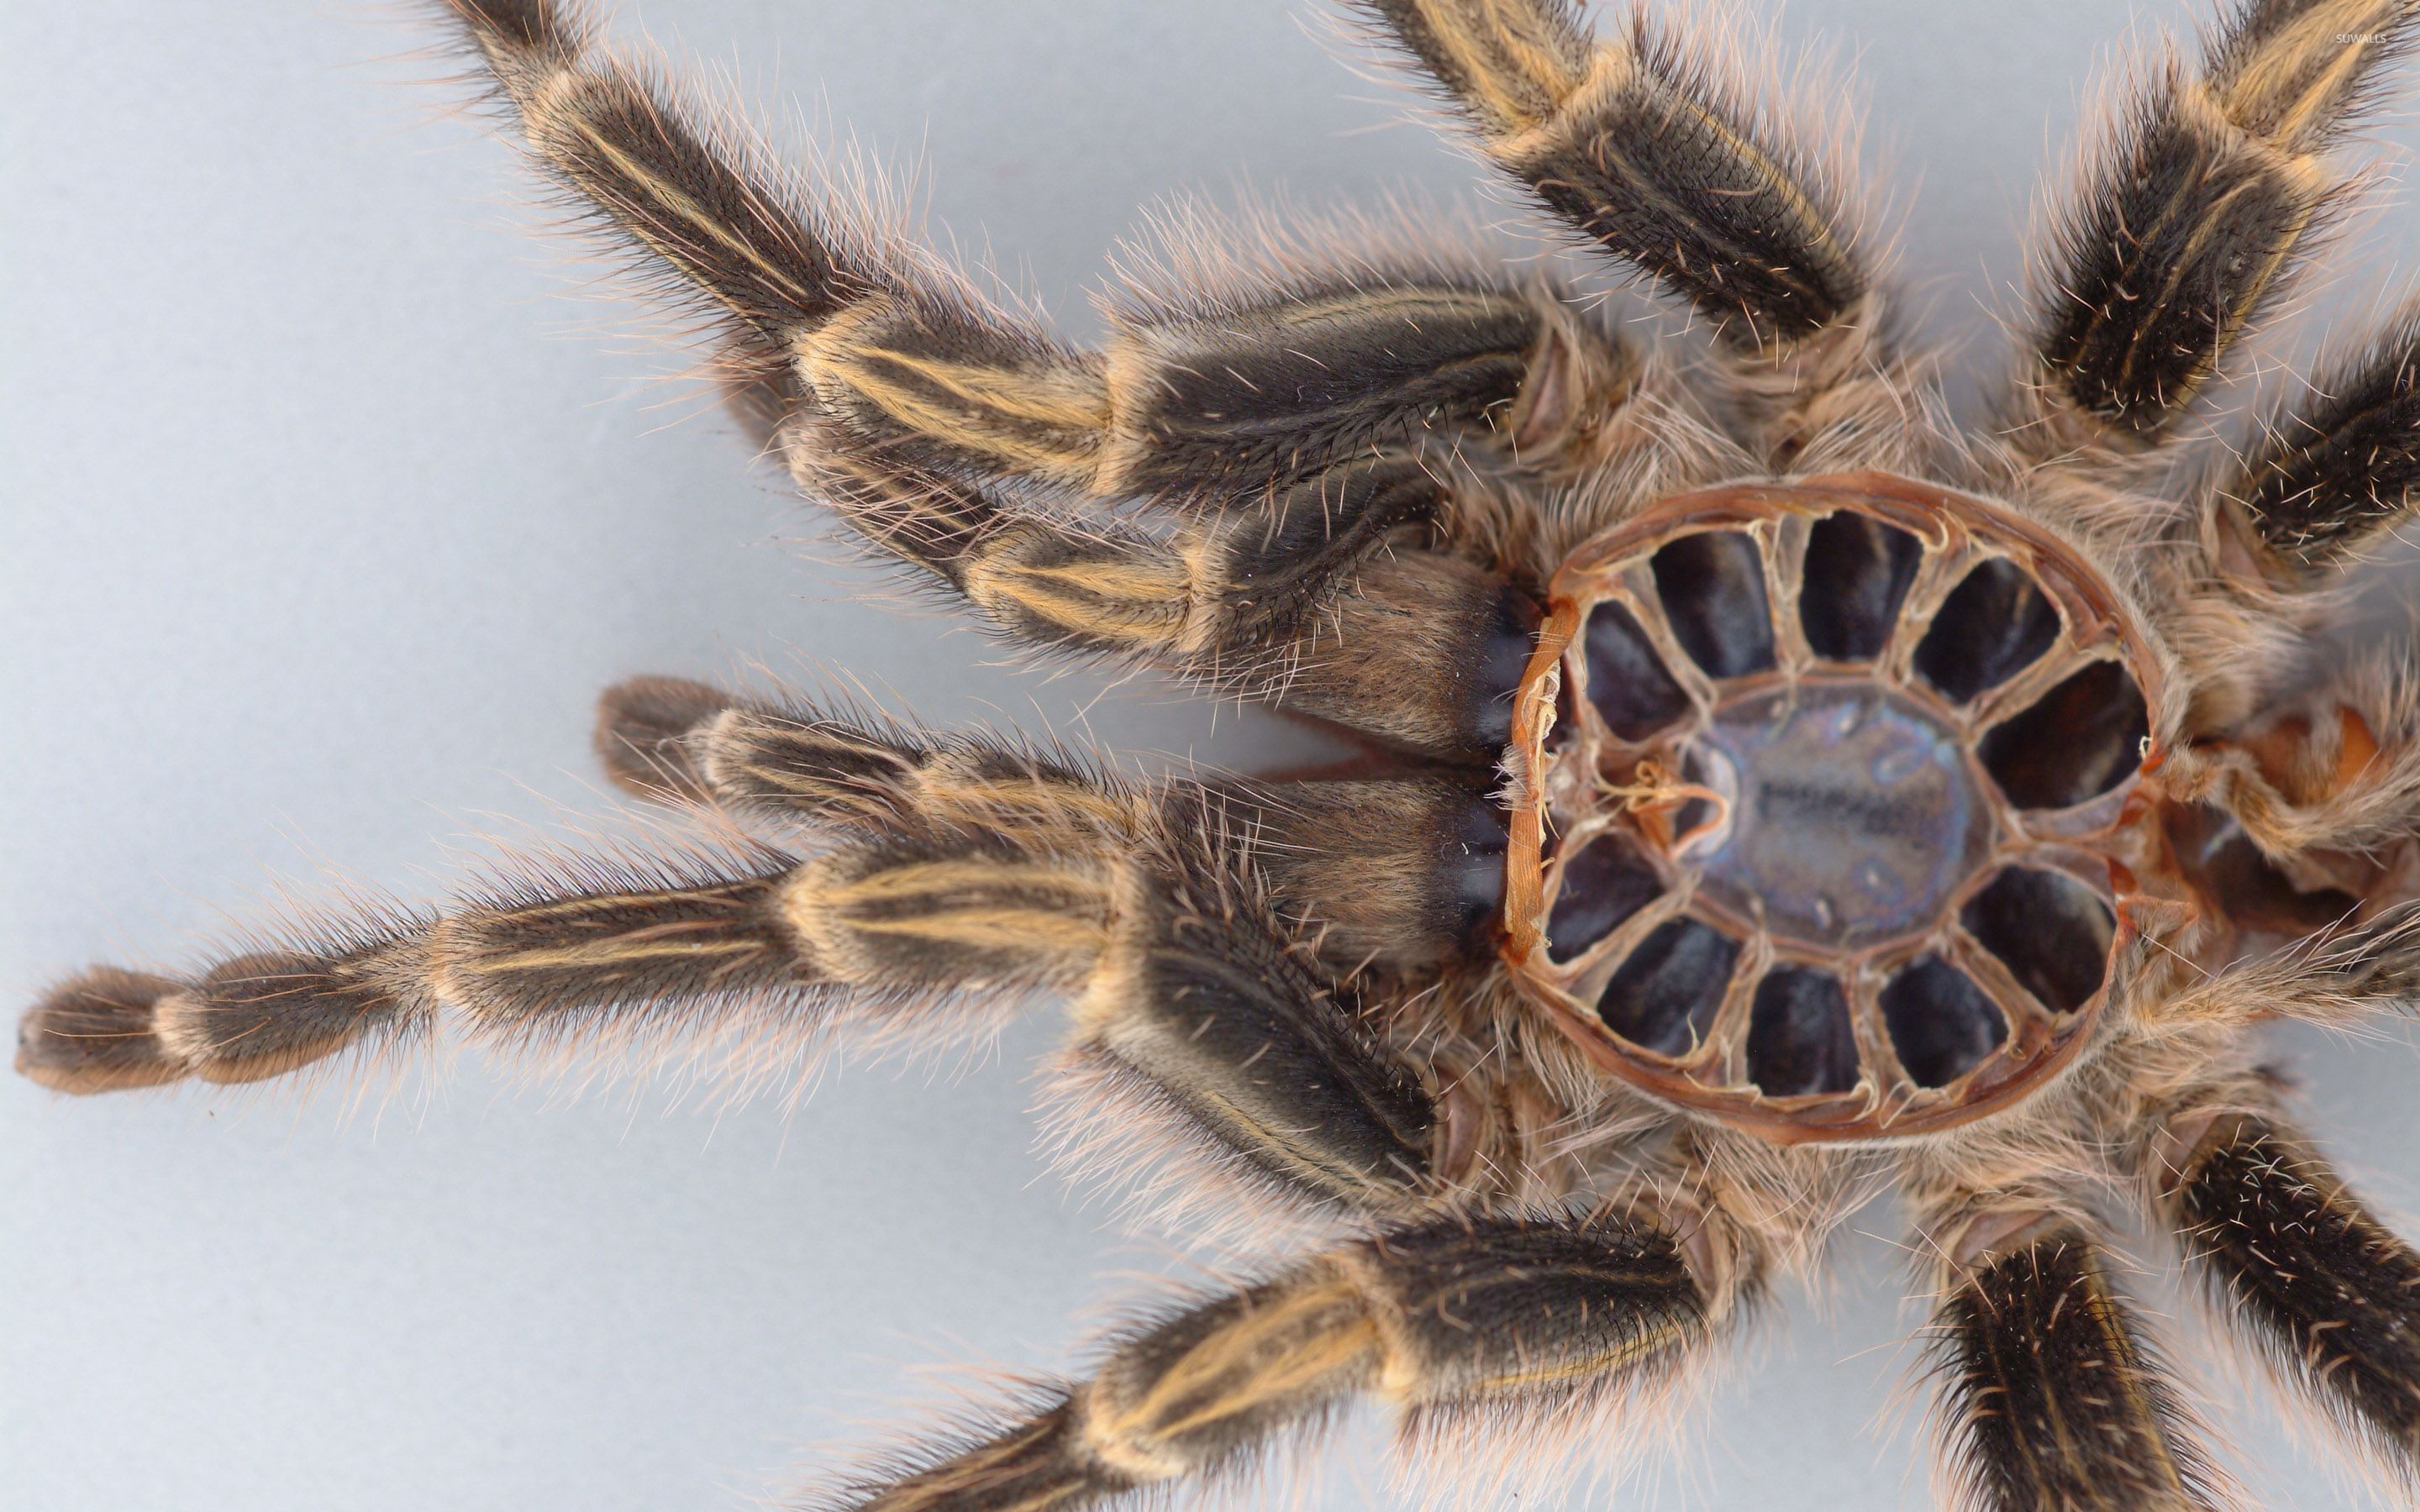  Spider  close  up  wallpaper Animal wallpapers 30032